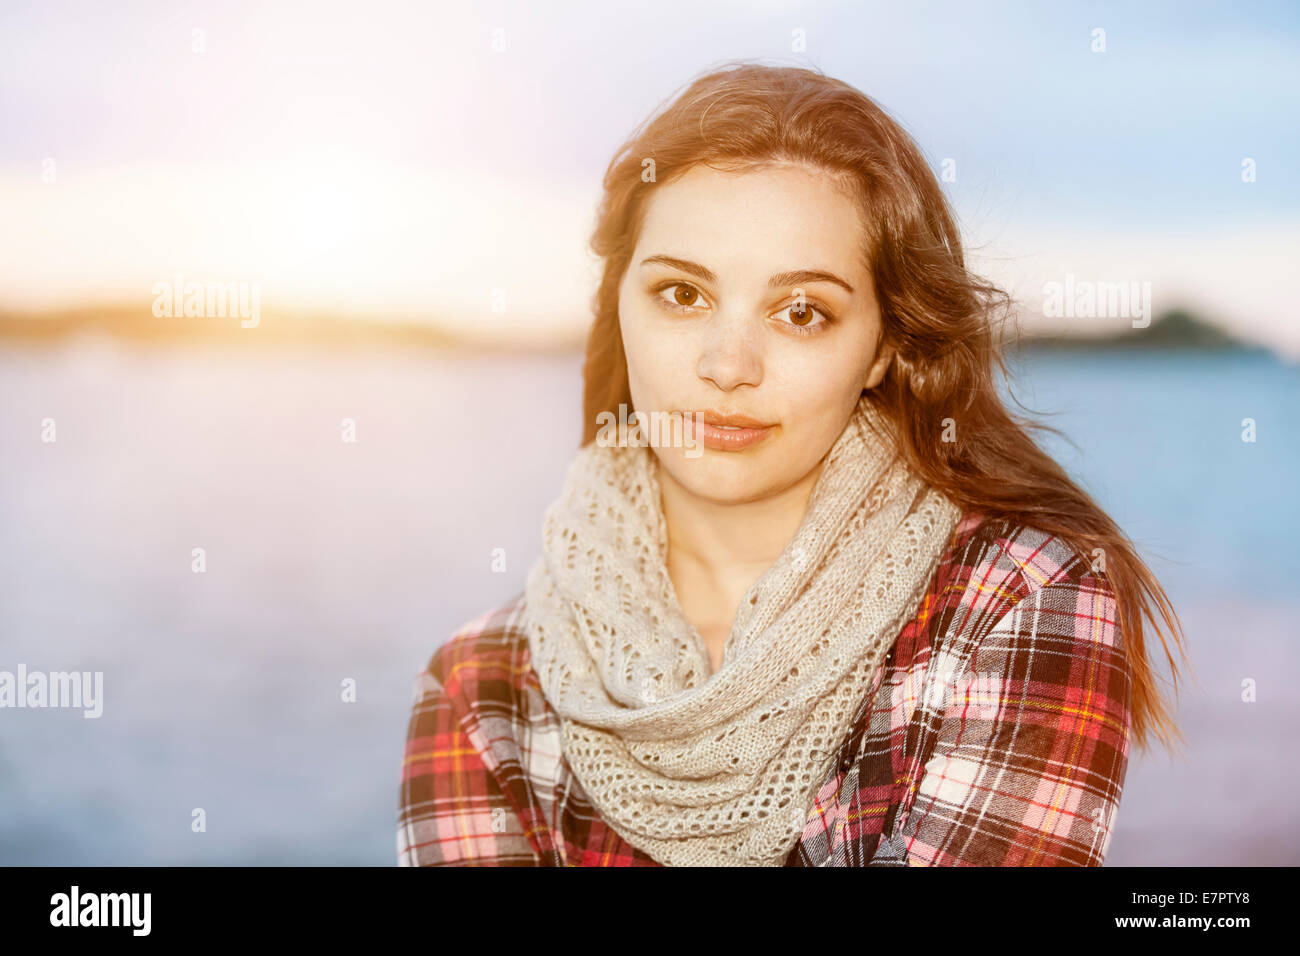 Portrait of young brunette woman near water looking at camera with copy space Stock Photo